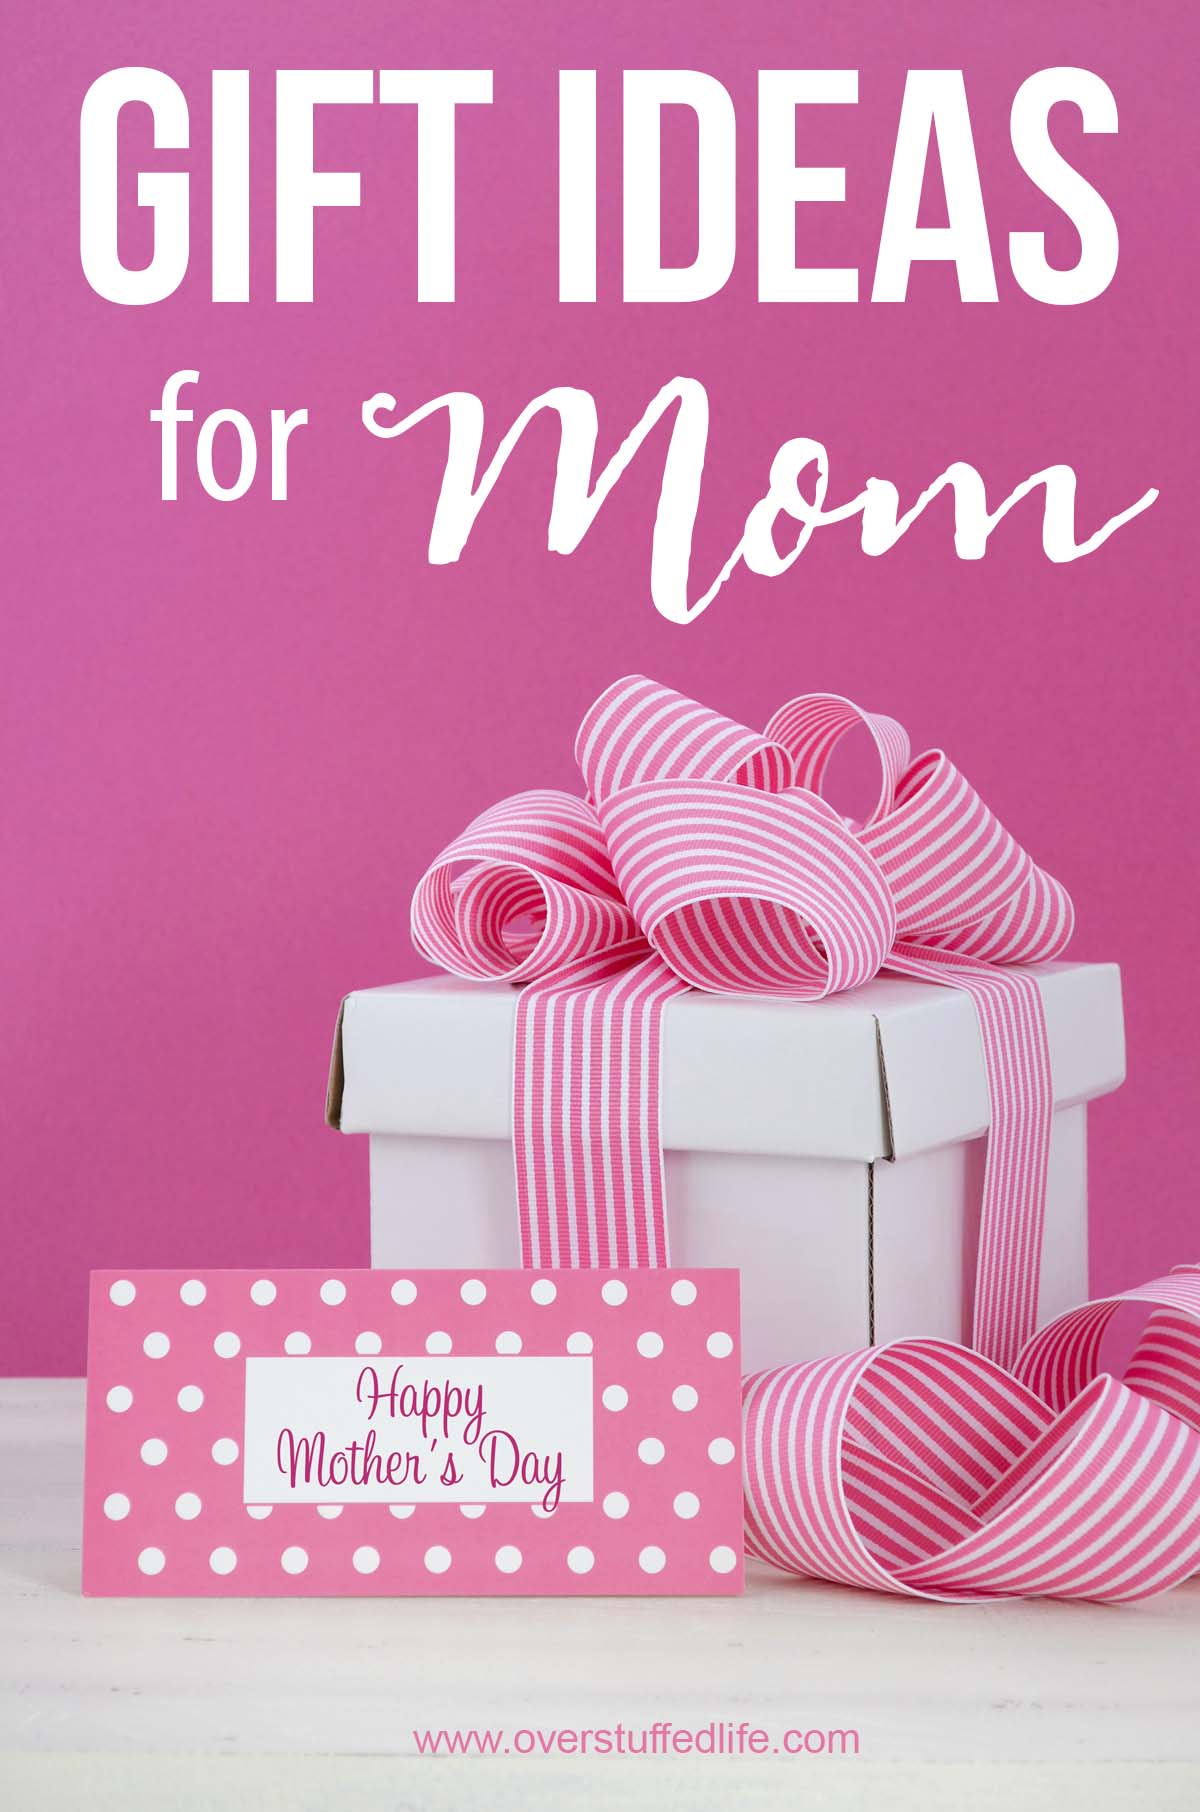 Give your mom a gift she will love. These ideas have something for every mom.